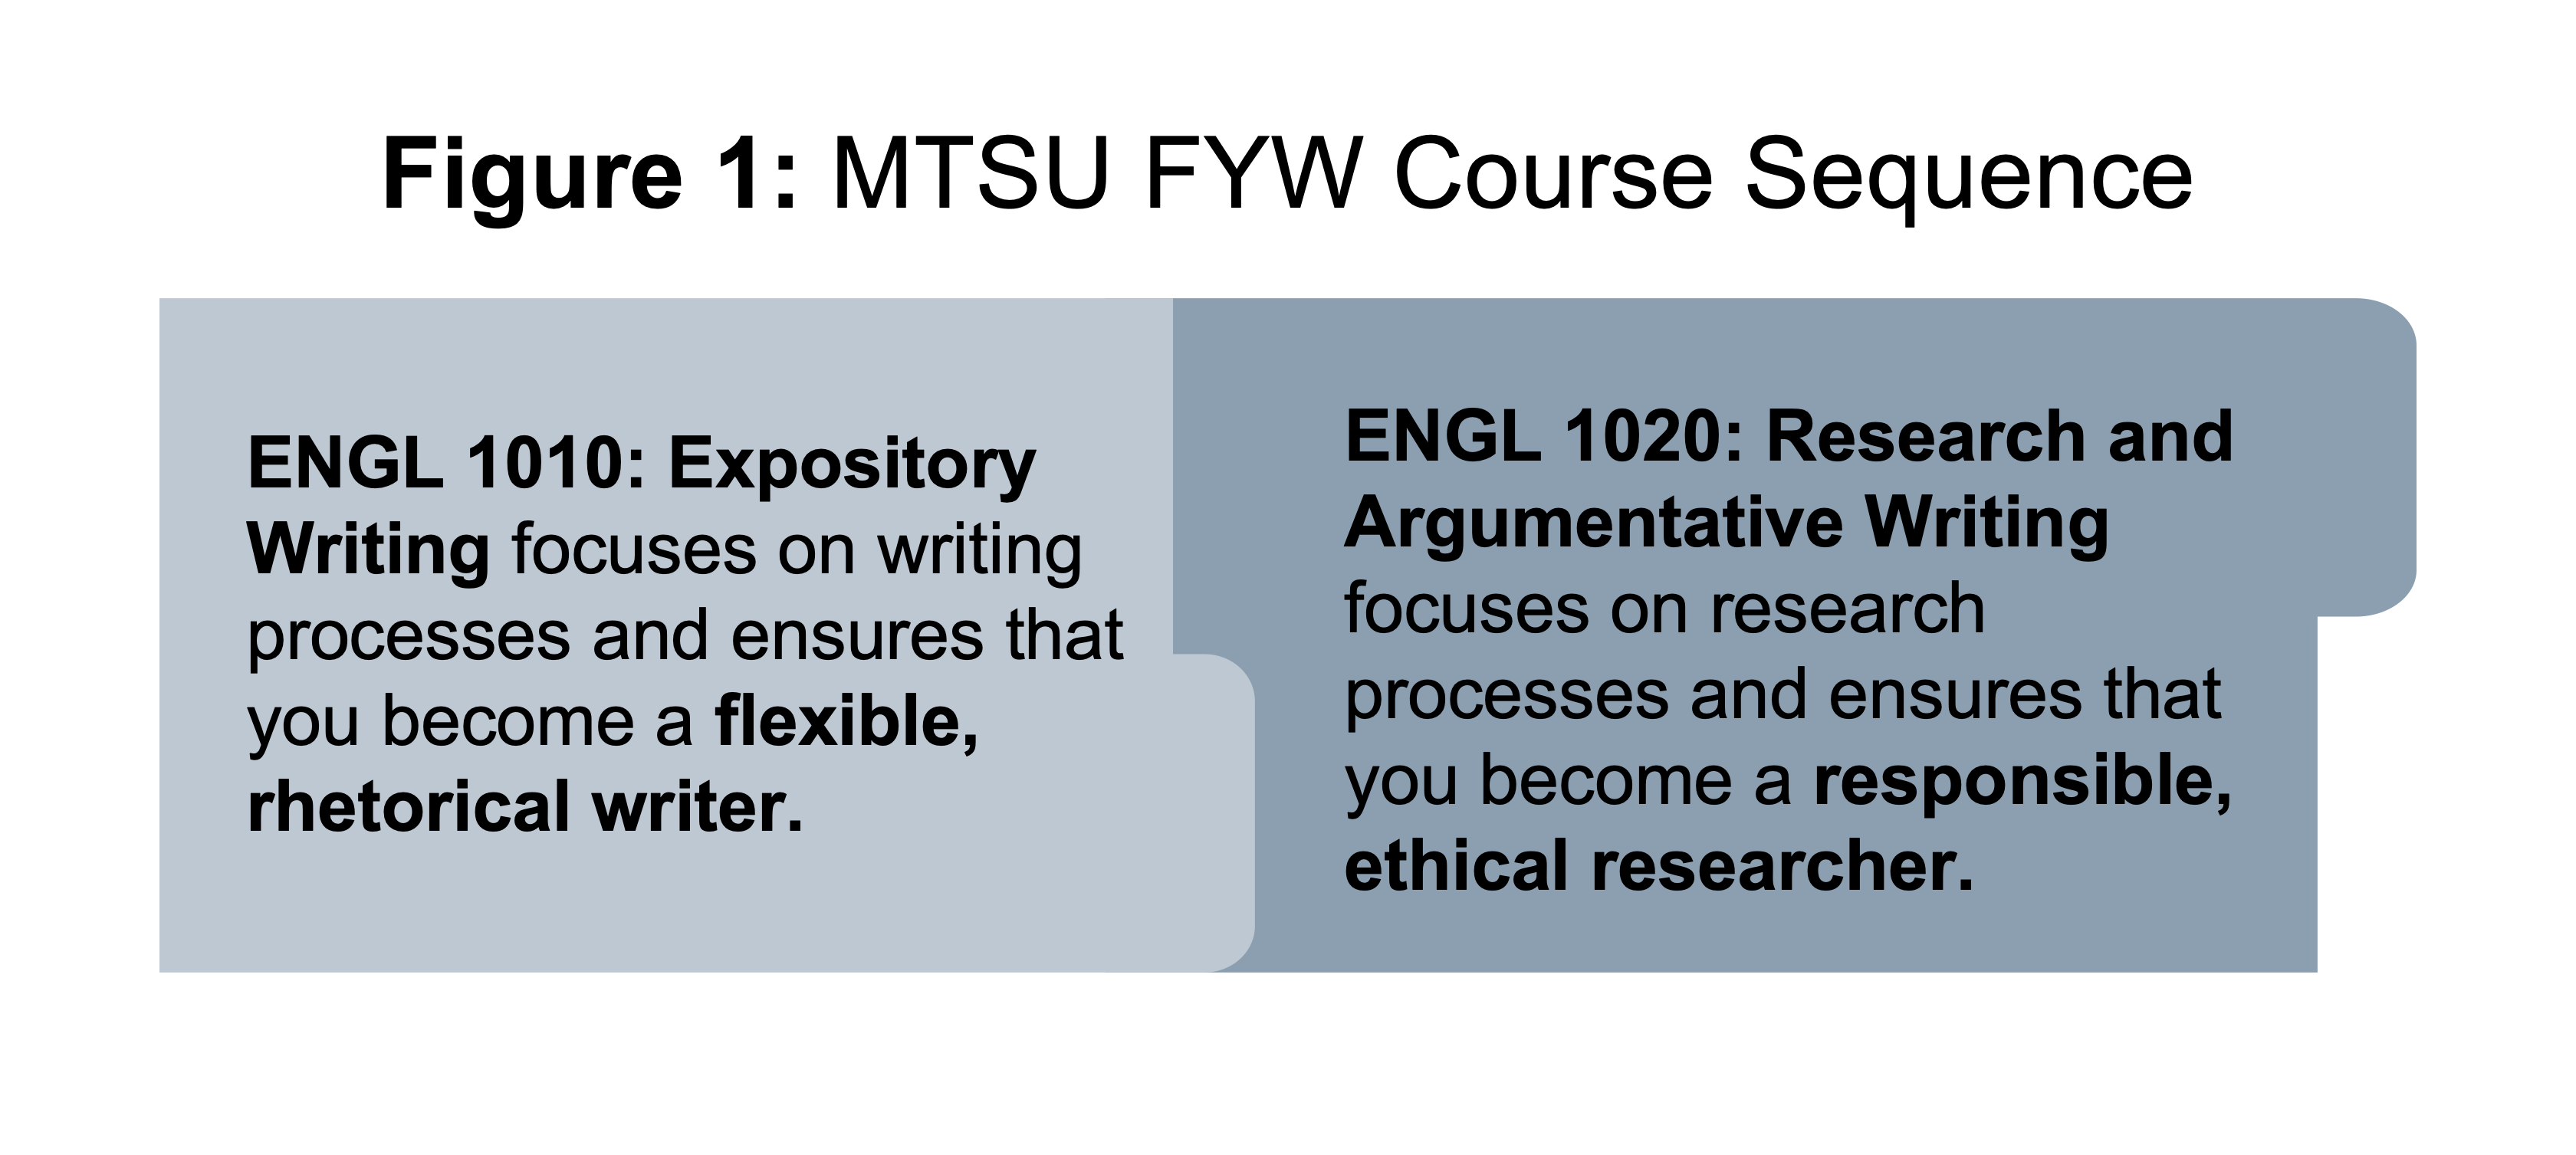 A two-sided image that defines the two courses in MTSU's FYW course sequence